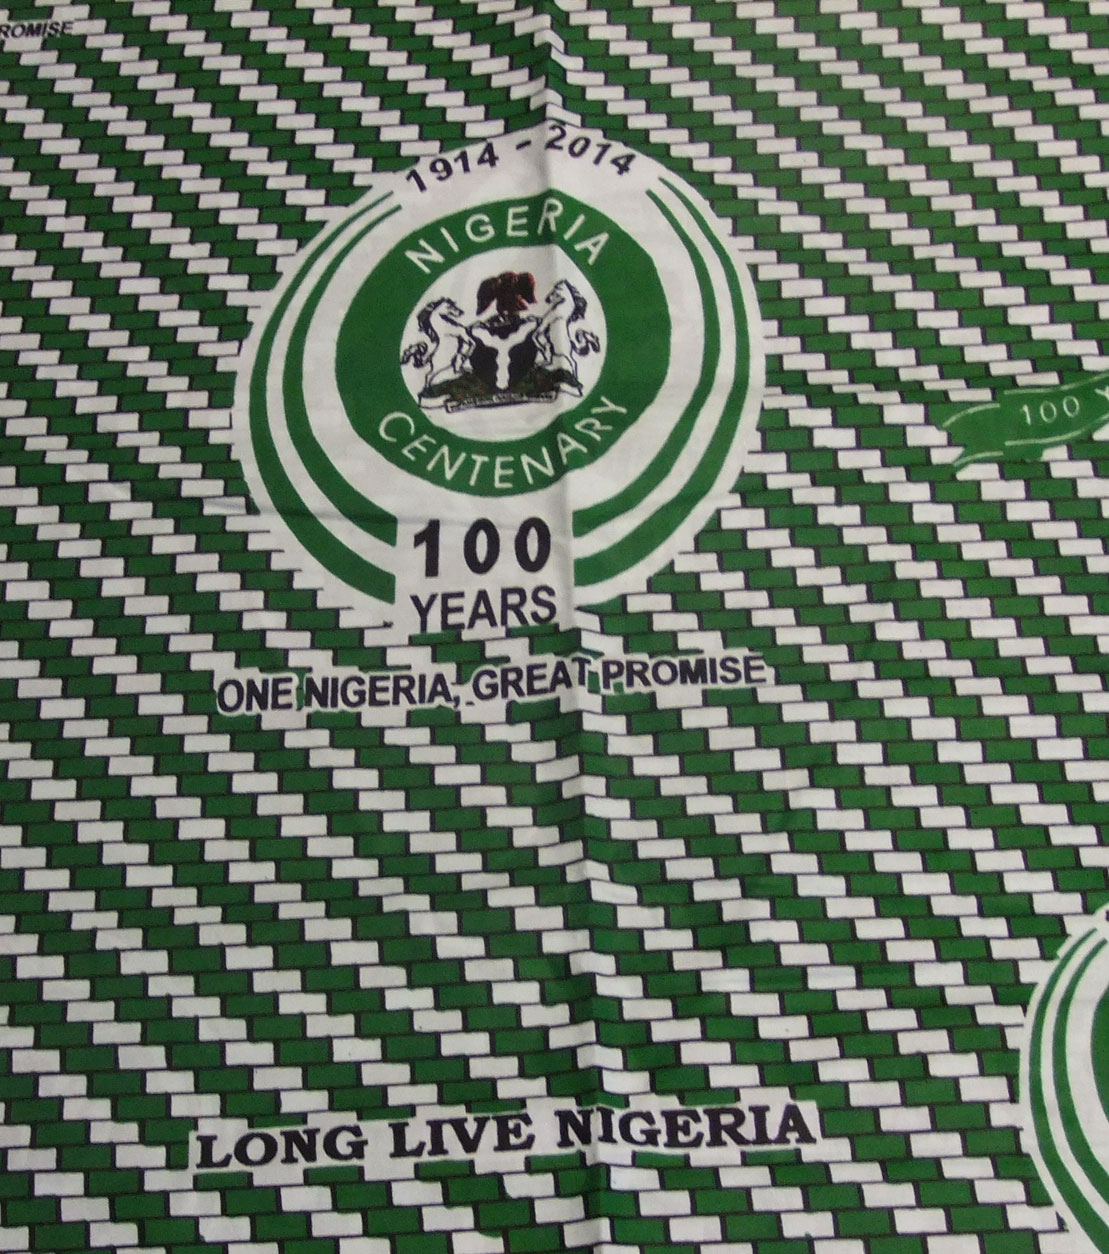 Cotton cloth printed to commemorate 'Nigeria100', marking the centenary of the merger between Northern and Southern Nigeria: Africa, West Africa, Nigeria, 2014.